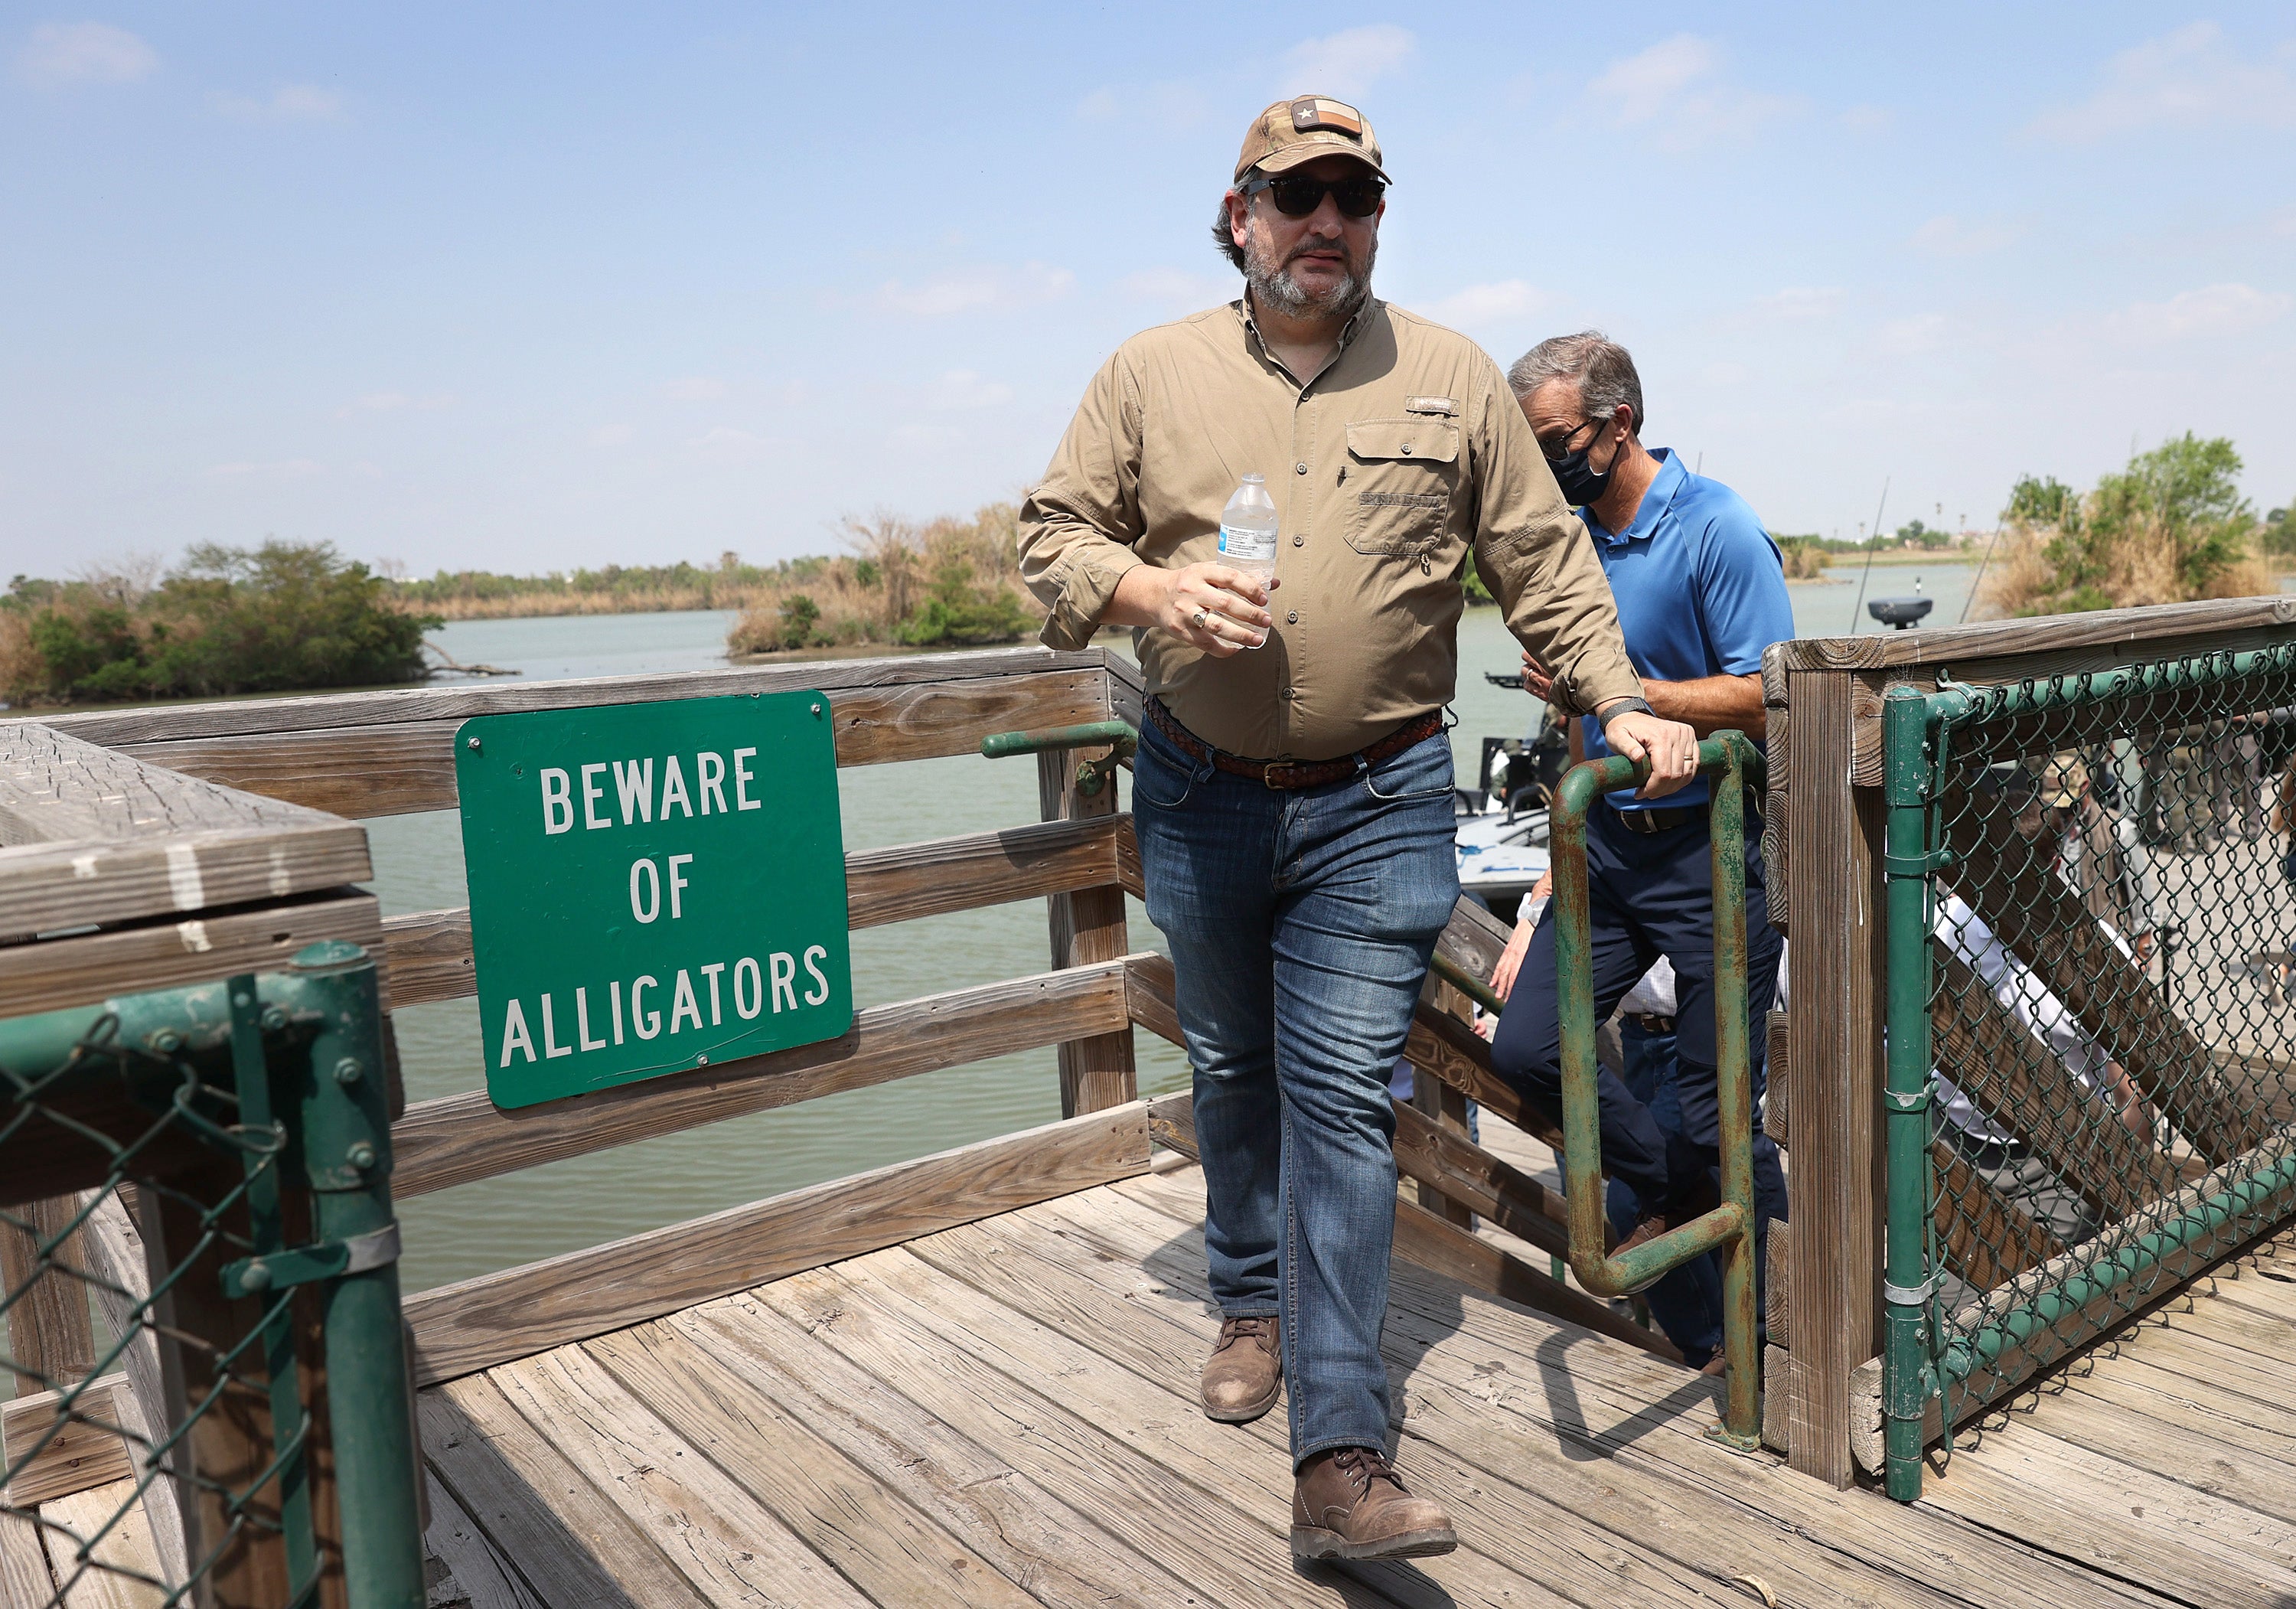 Ted Cruz was among 18 Republicans who patrolled the Rio Grande